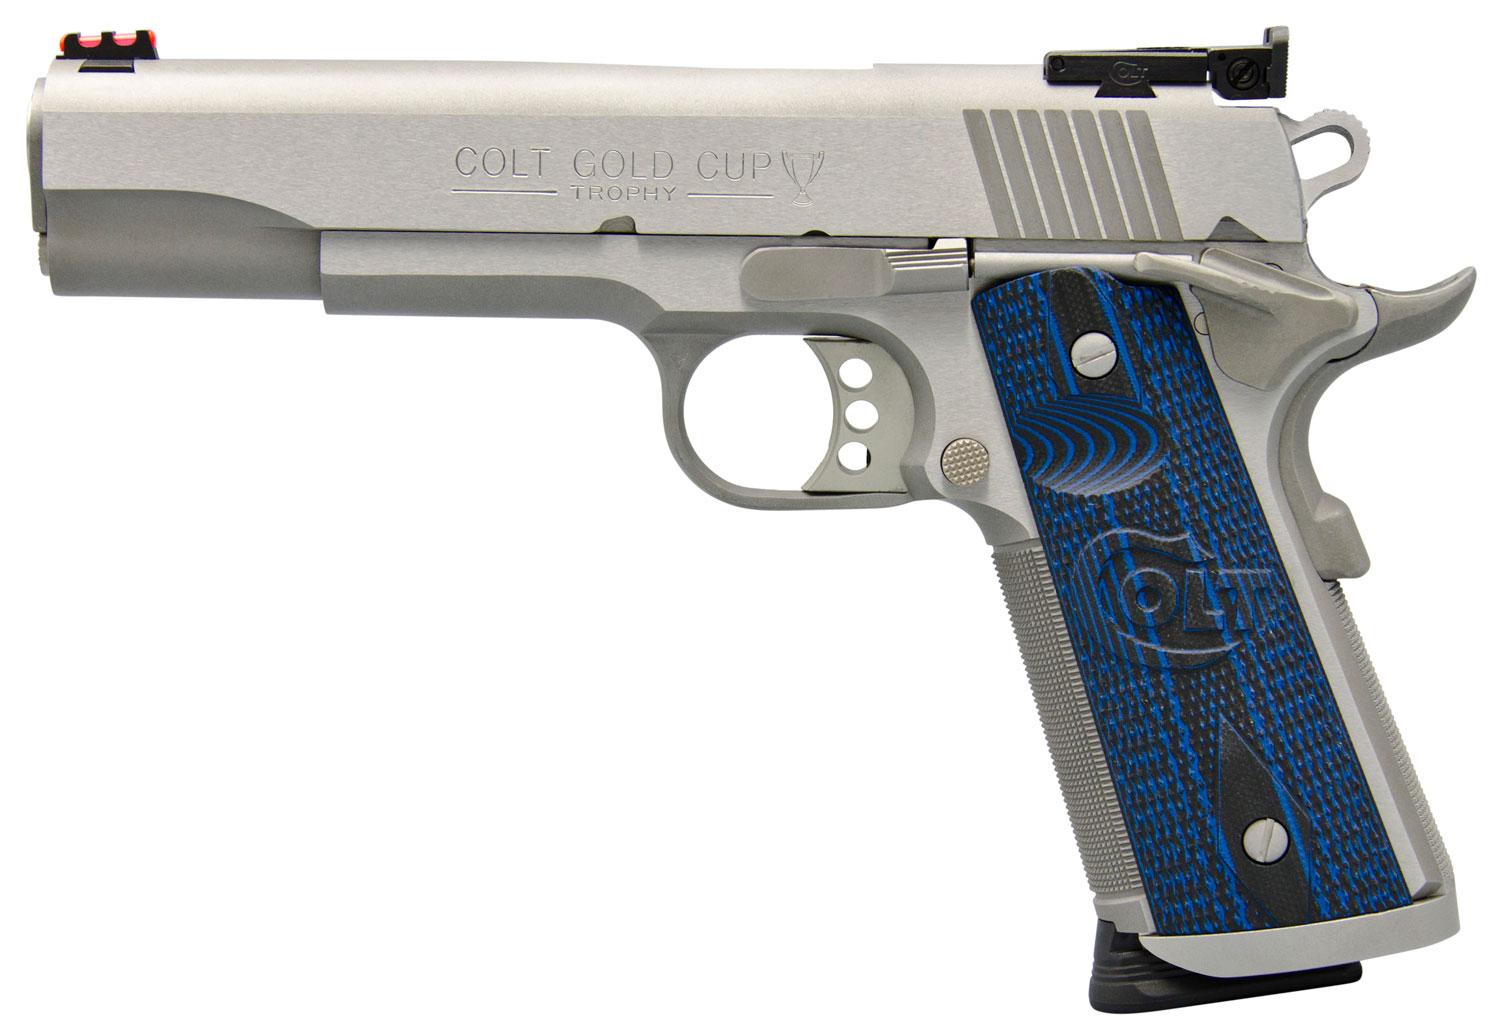  Colt Gold Cup 9mm 5 9rd Sts